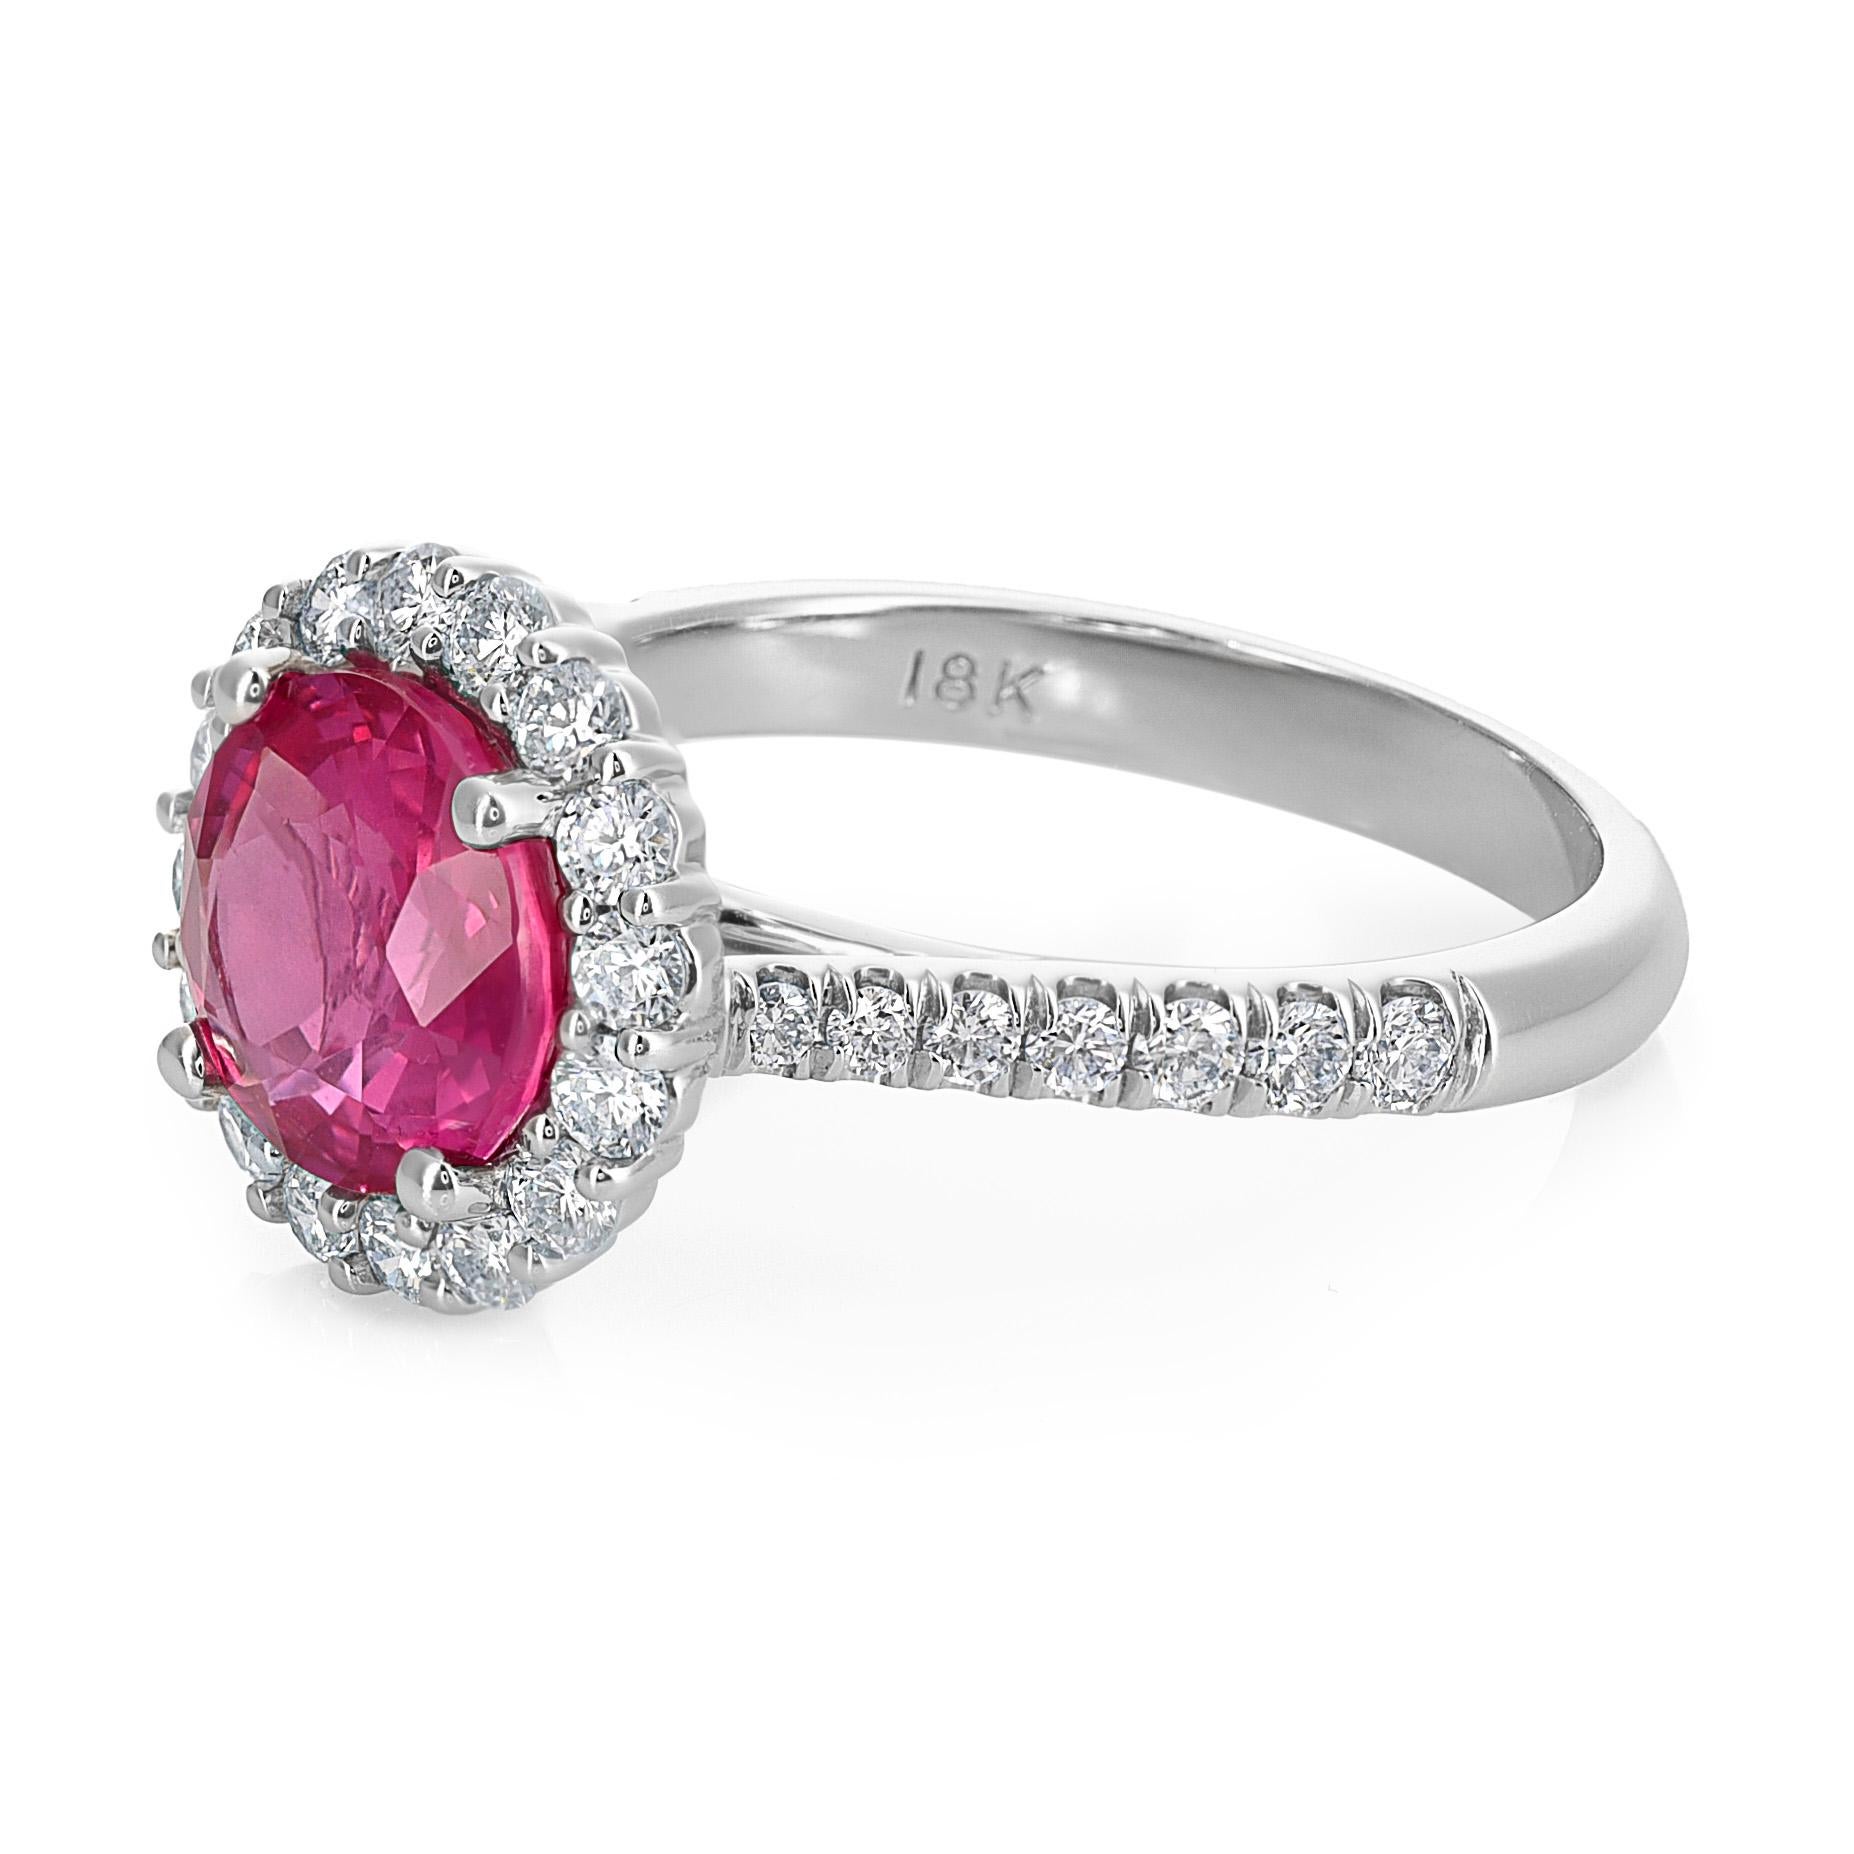 Immerse yourself in elegance with this 18K White Gold Ring featuring a 2.53 carats Natural Pink Sapphire in a charming round shape. The rosy hues of the Pink Sapphire are enriched through a meticulous heating process, enhancing its inherent beauty.